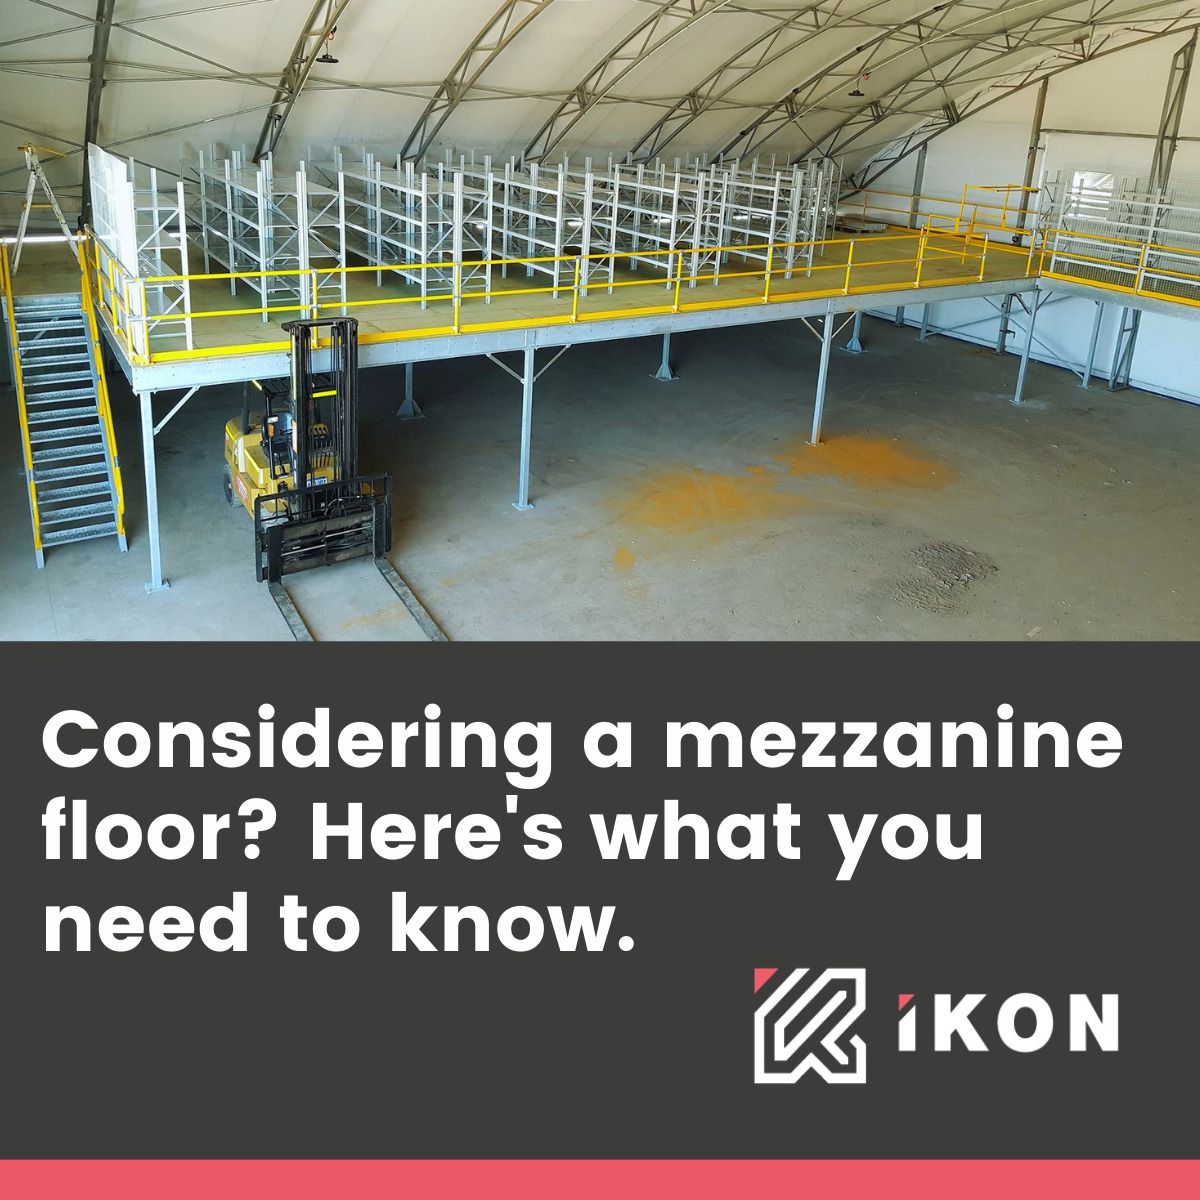 WHAT YOU NEED TO KNOW WHEN CONSIDERING A MEZZANINE FLOOR